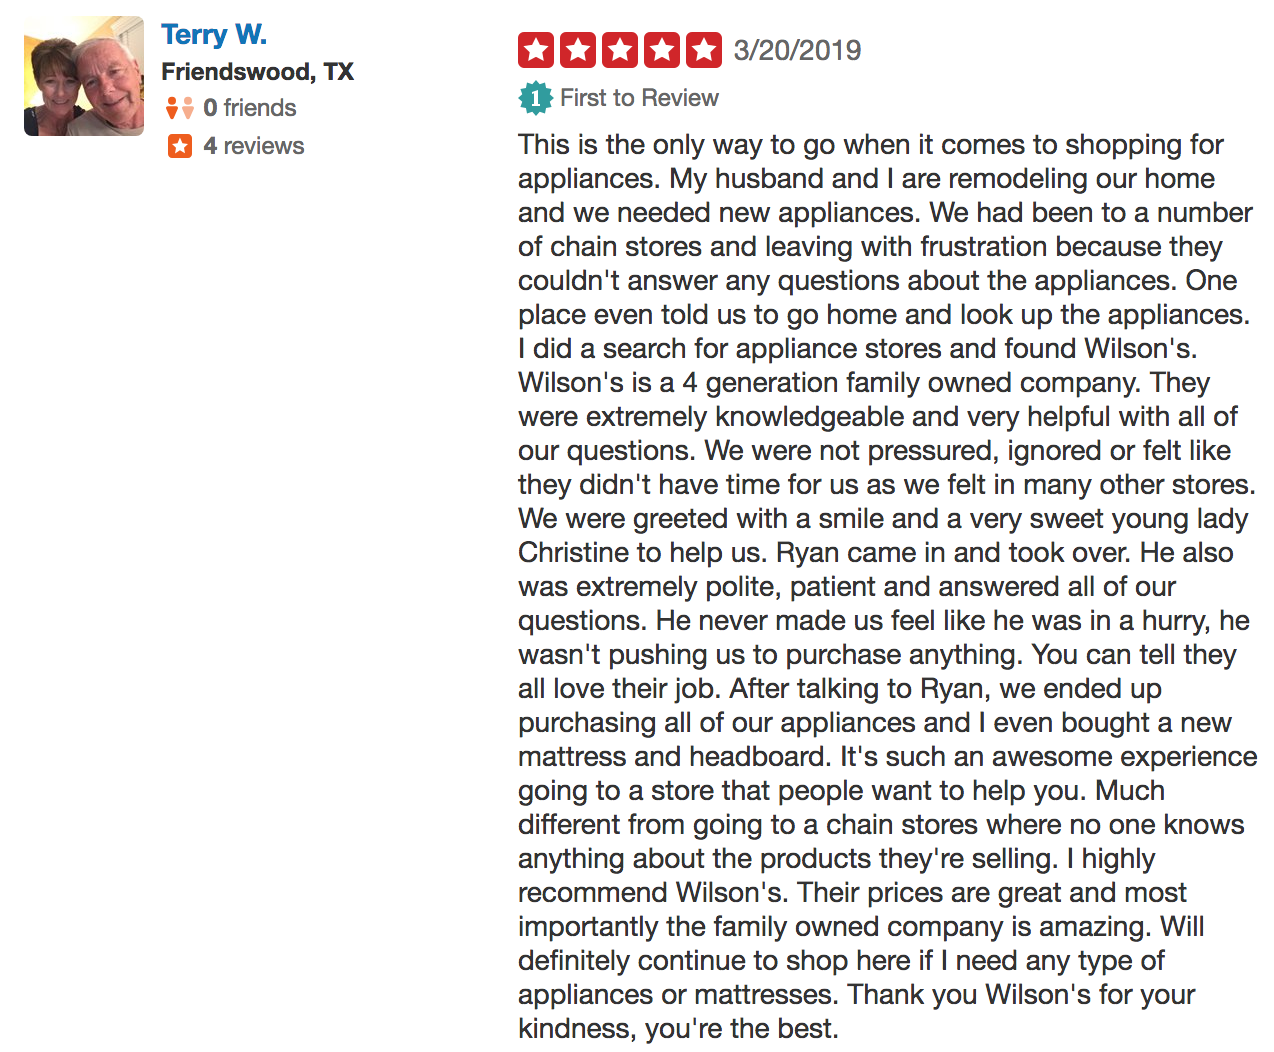 yelp review for wilson's appliances and mattresses in conroe, tx, montgomery county